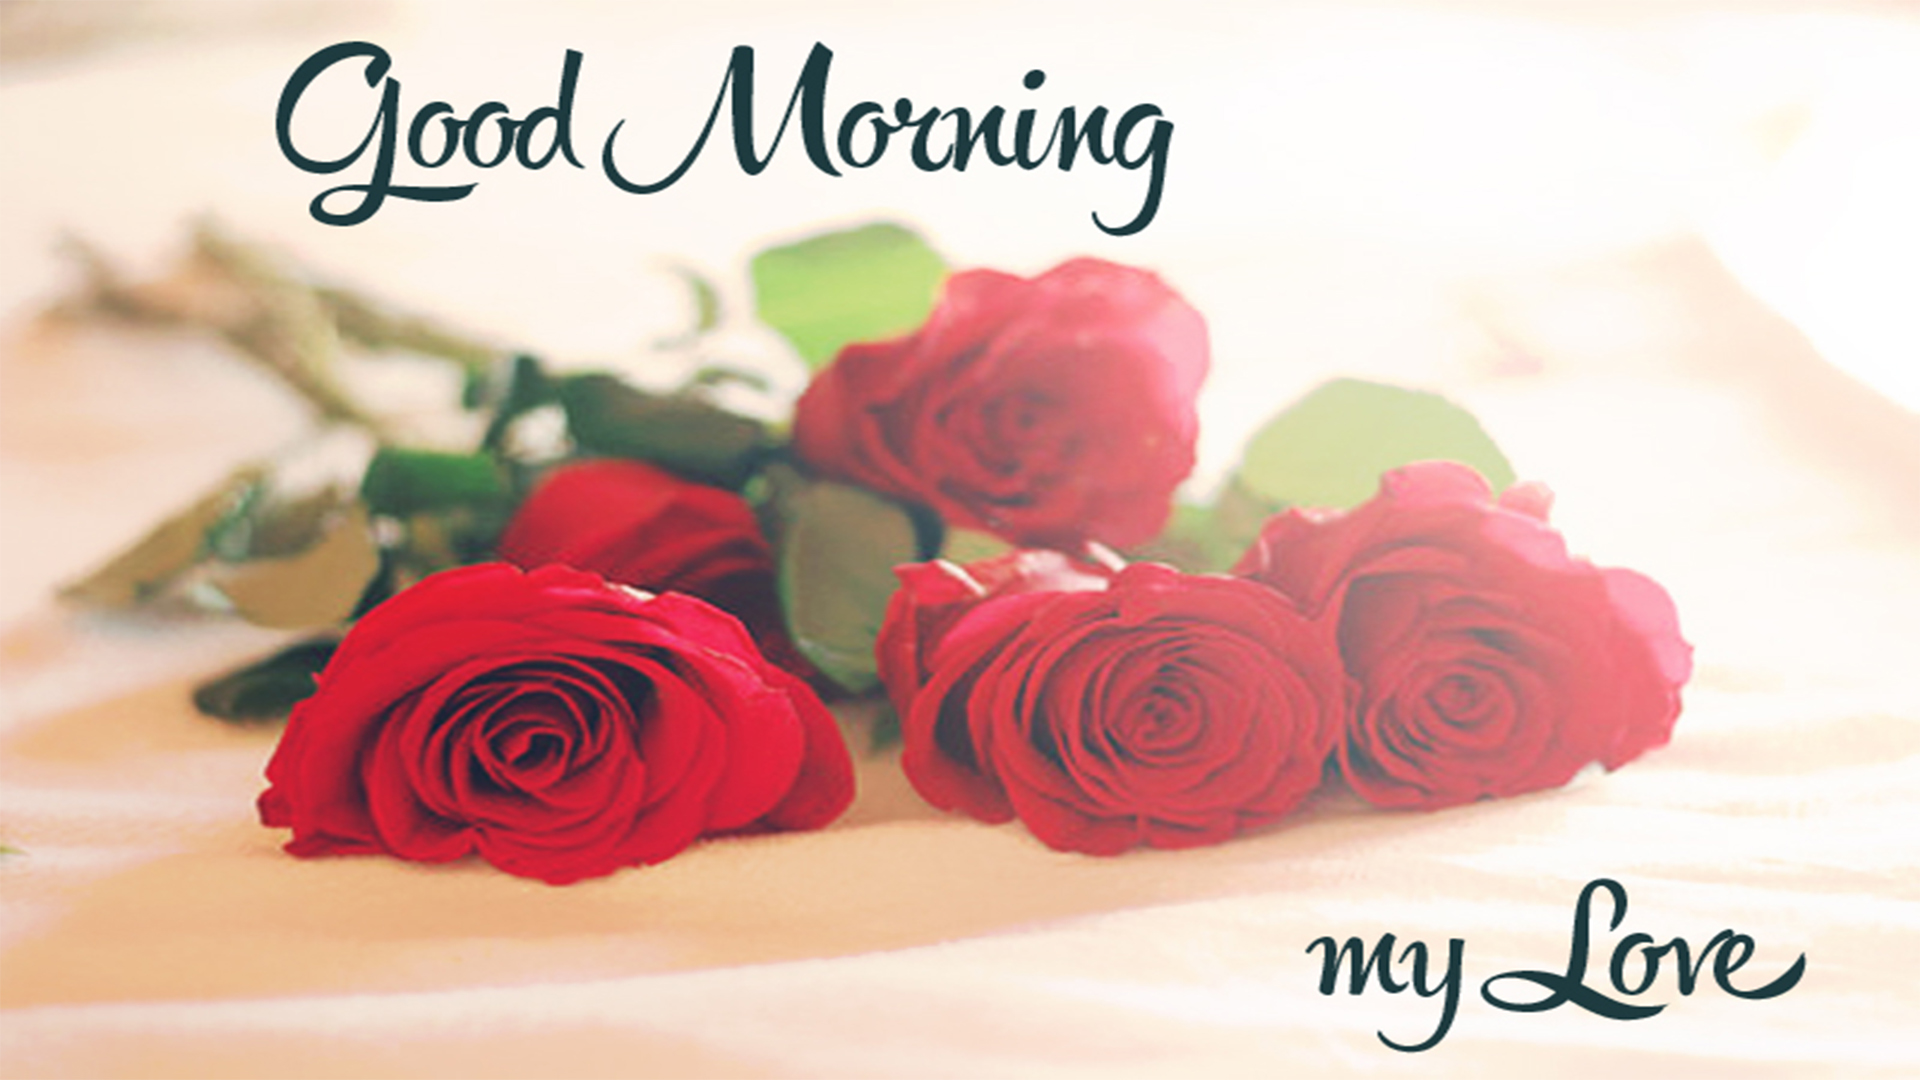 Good Morning My Love Animated Images | Morning Love Greetings